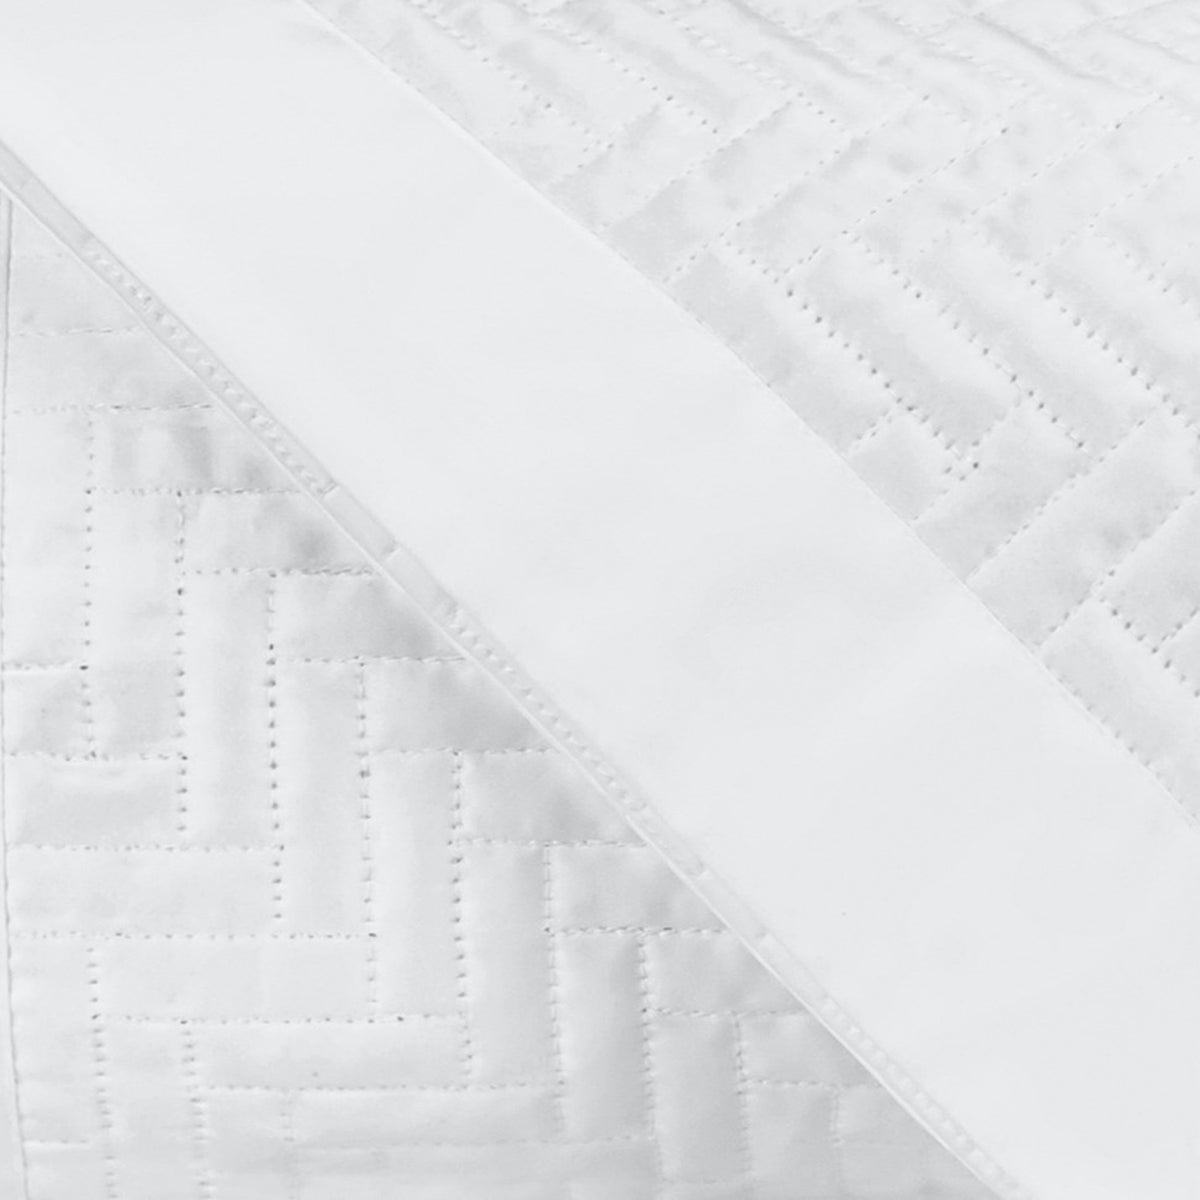 Swatch Sample of Home Treasures Baxter Royal Sateen Quilted Bedding in Color White